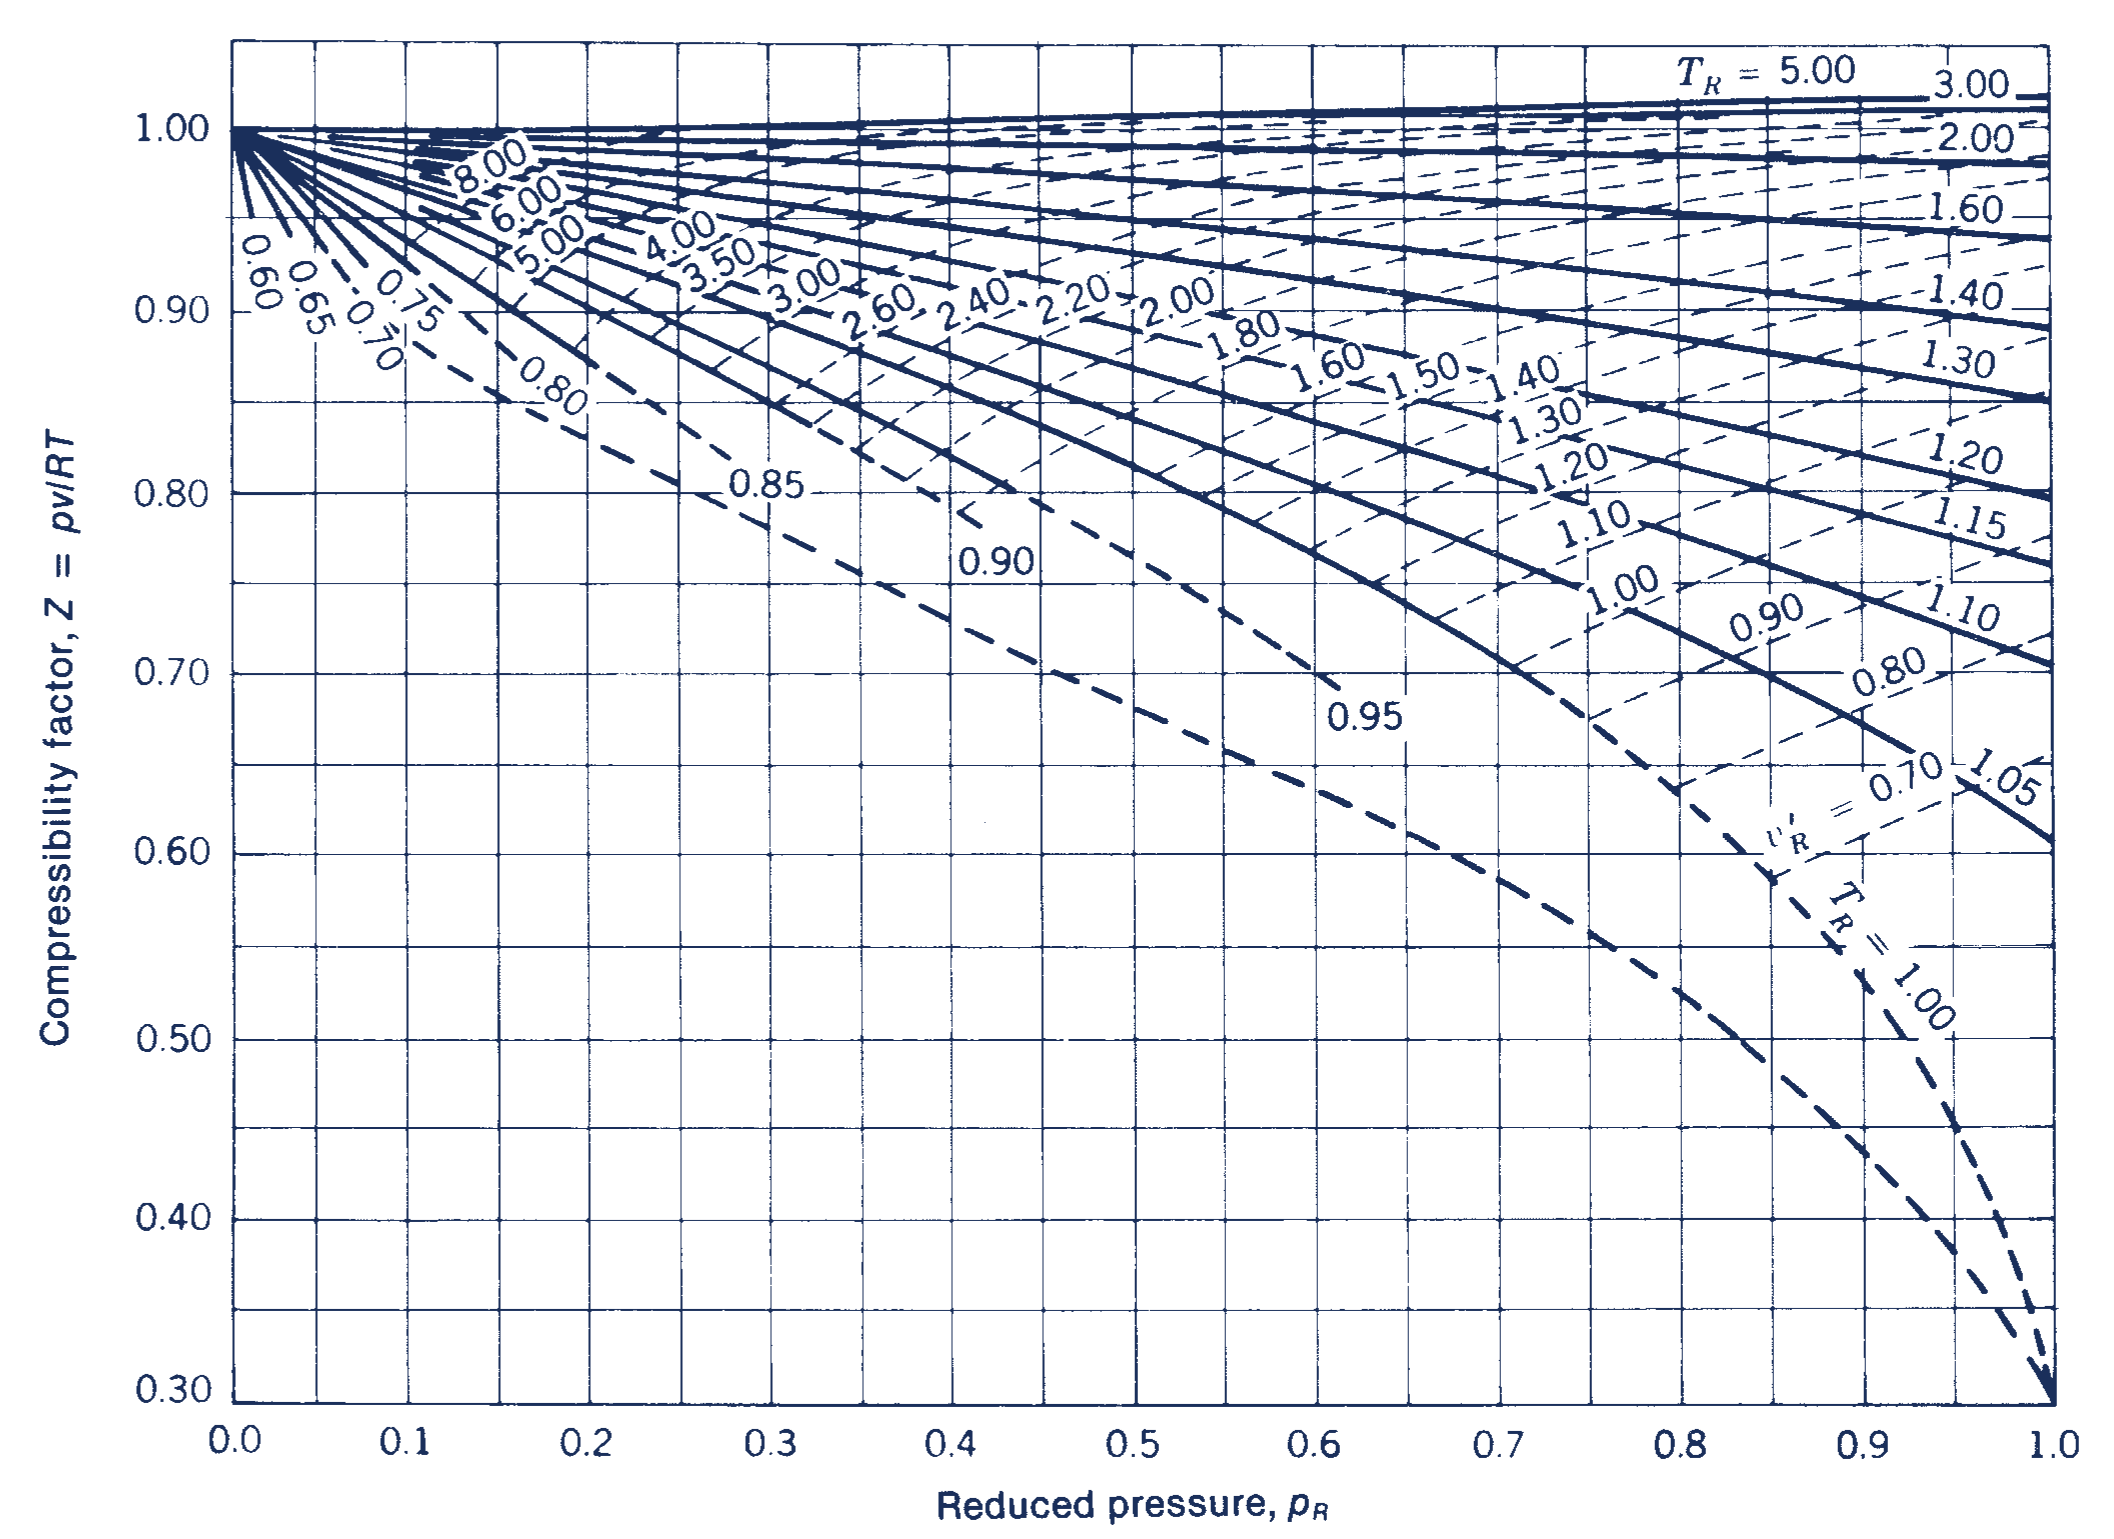 Generalized compressibility chart, reduced pressure less than 1.0